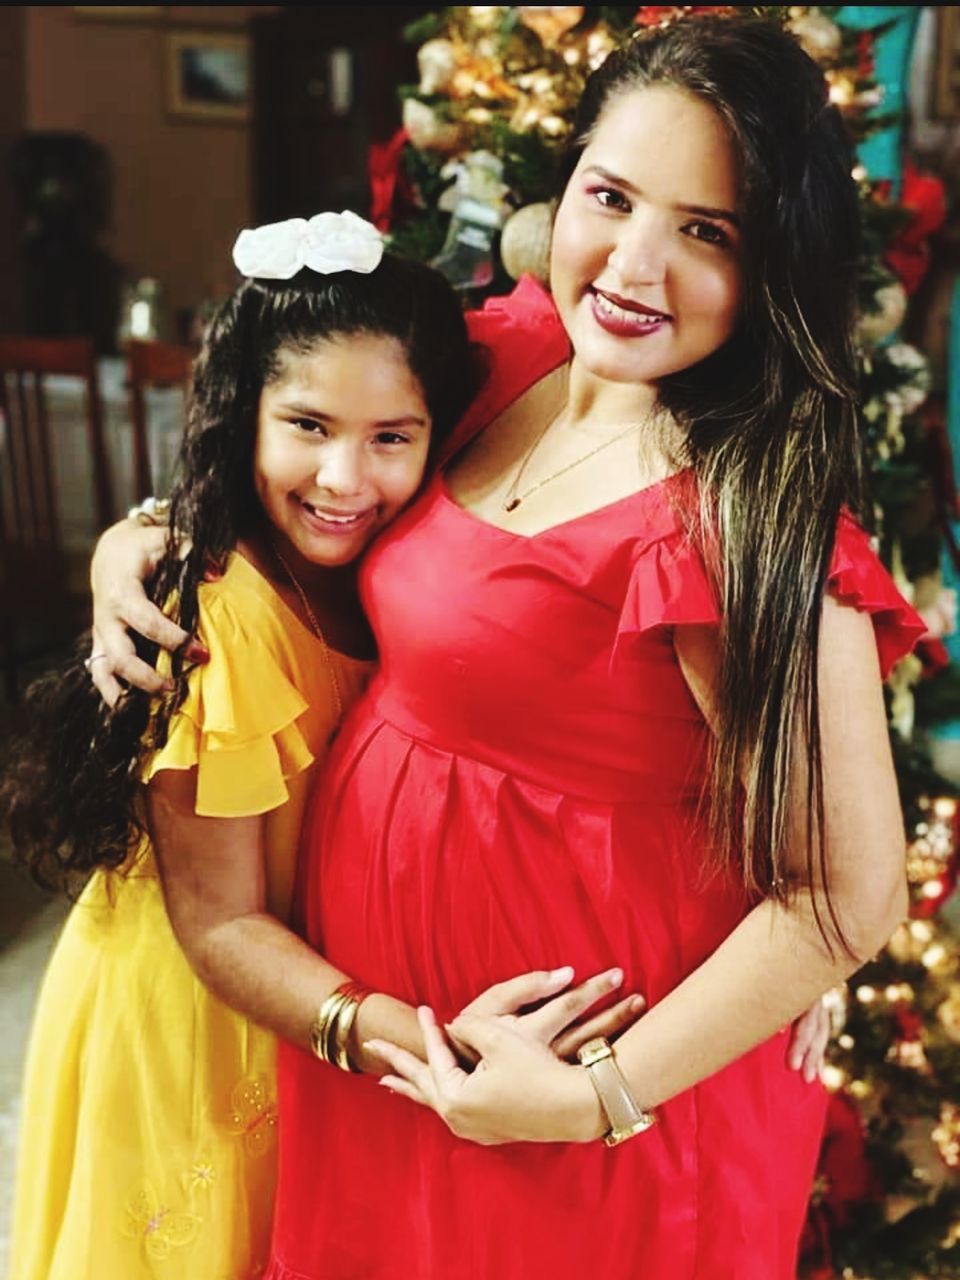 women, smiling, happiness, emotion, adult, celebration, christmas tree, female, christmas, two people, togetherness, positive emotion, child, cheerful, holiday, family, portrait, looking at camera, clothing, love, childhood, lifestyles, young adult, decoration, joy, red, tradition, tree, event, plant, dress, bonding, enjoyment, parent, person, human face, standing, friendship, outdoors, gift, waist up, christmas decoration